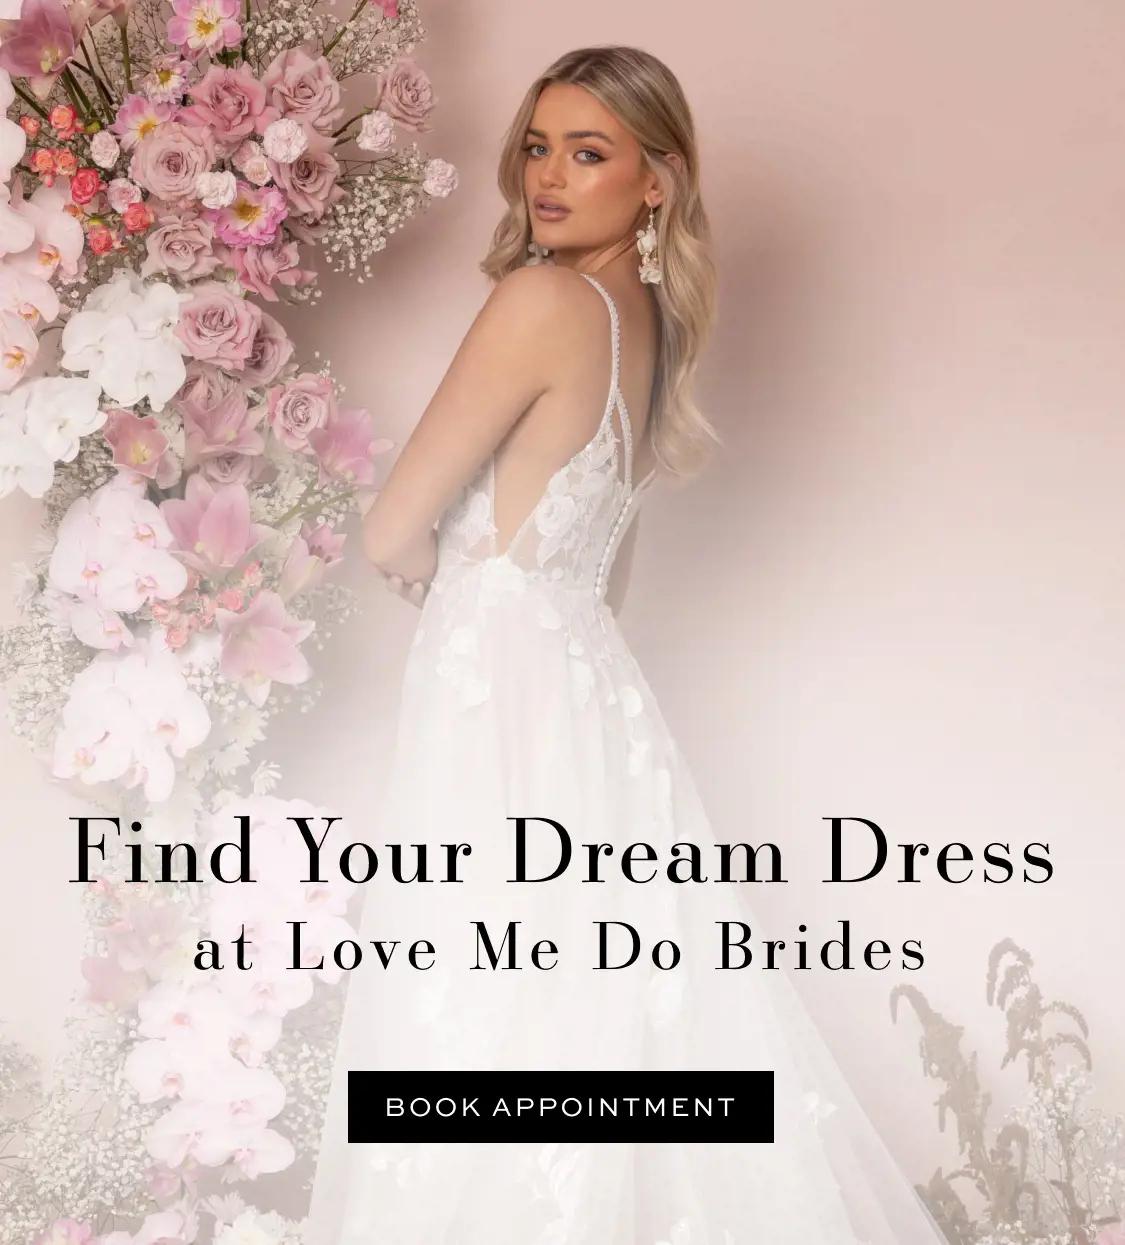 Desktop banner of model wearing bridal gown. Text reading "Find your dream dress at Love Me Do Brides". Linking to appointments page